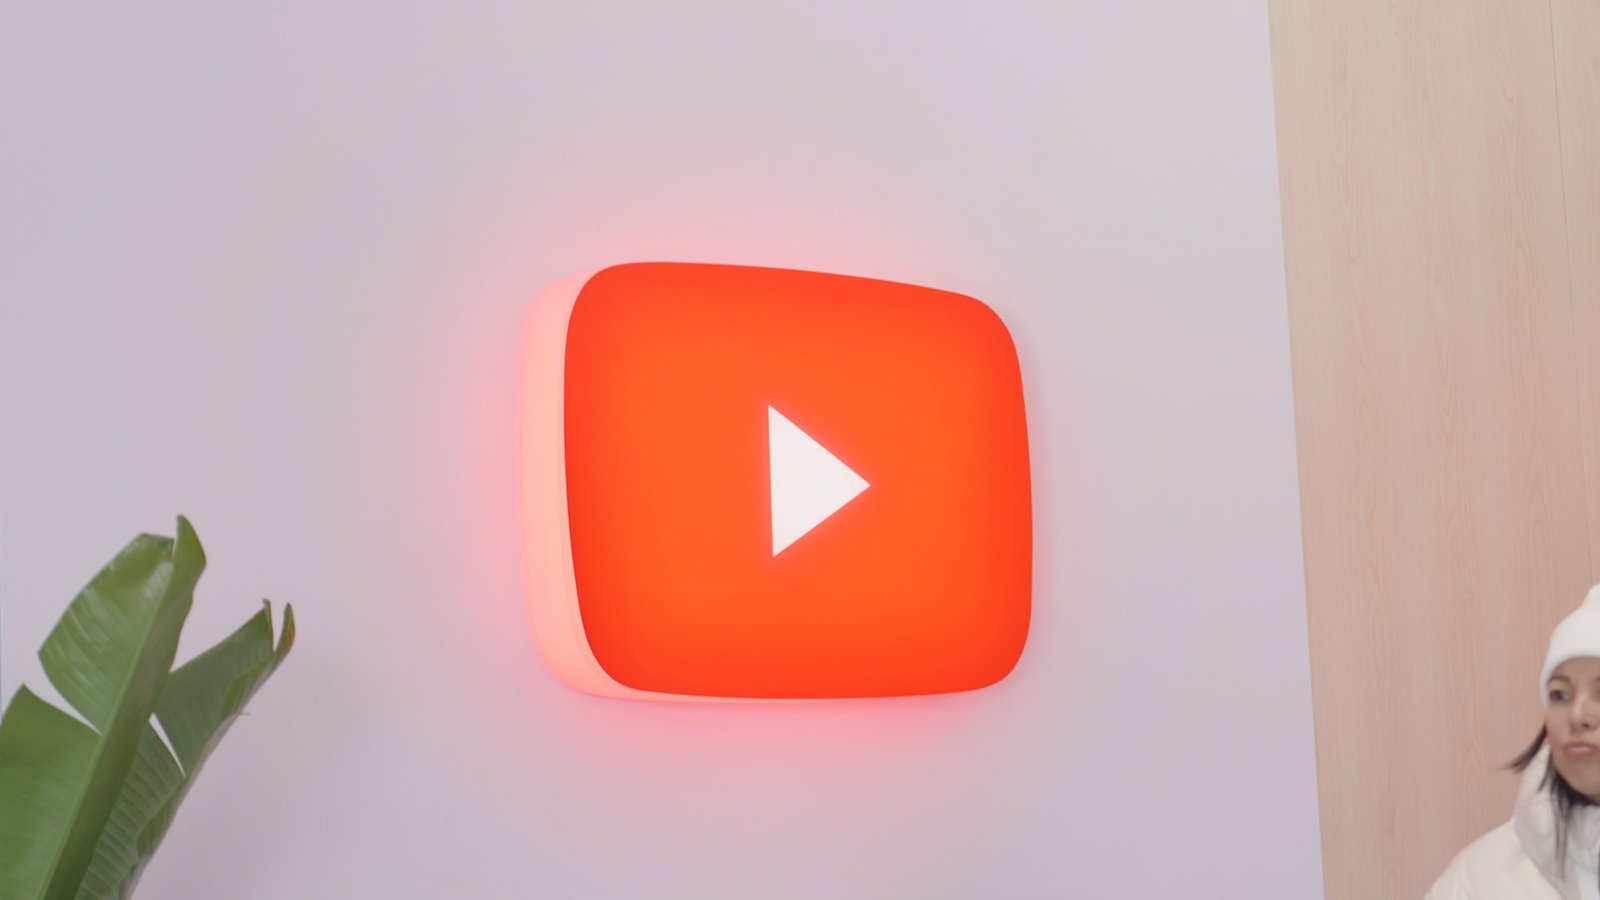 YouTube is making some important changes for gun-related videos